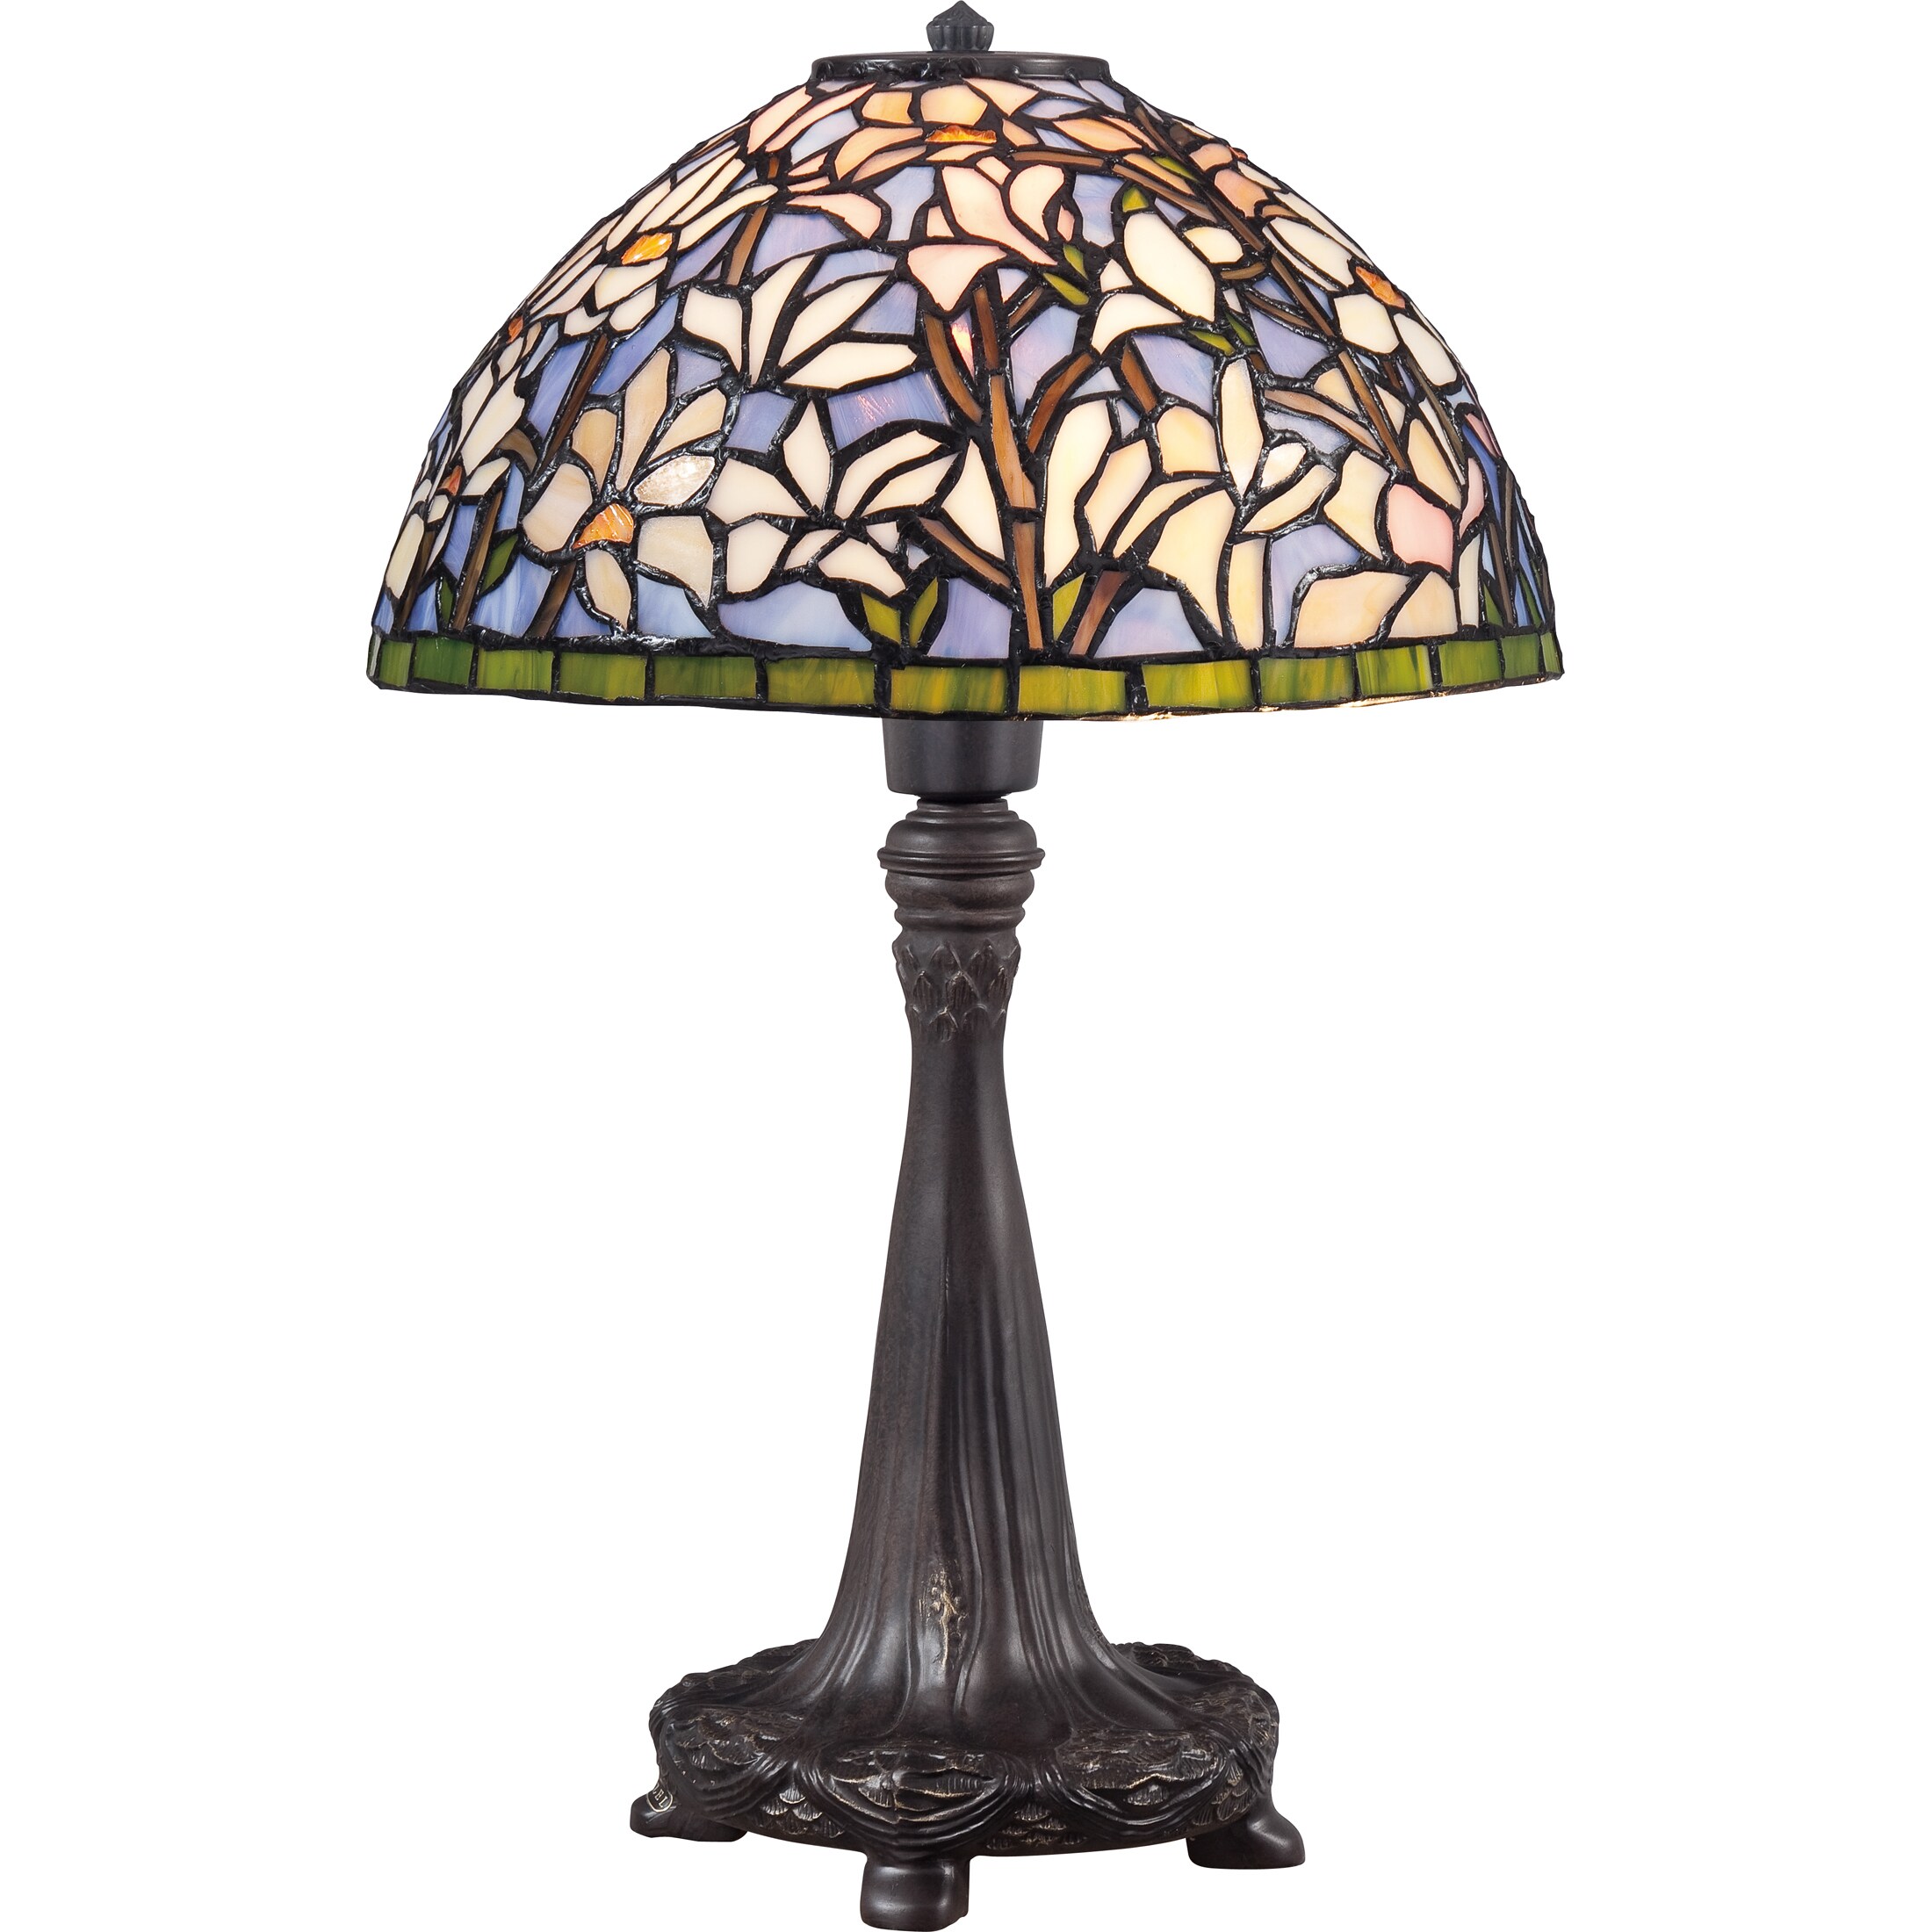 Tiffany Wildflower With Imperial Bronze Finish Table Lamp